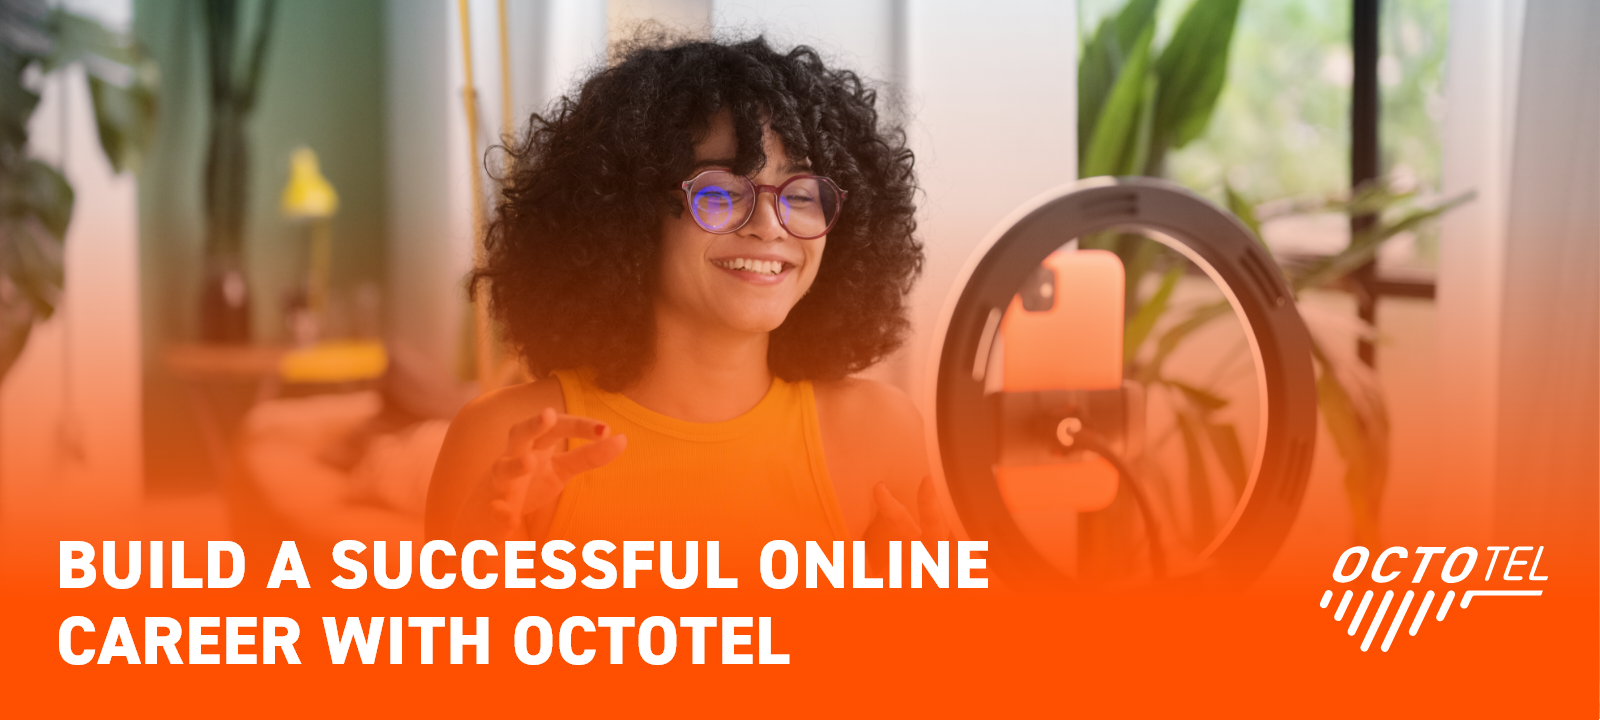 JOIN THE DIGITAL PLAYGROUND: FIND YOUR DREAM JOB WITH OCTOTEL FIBRE.